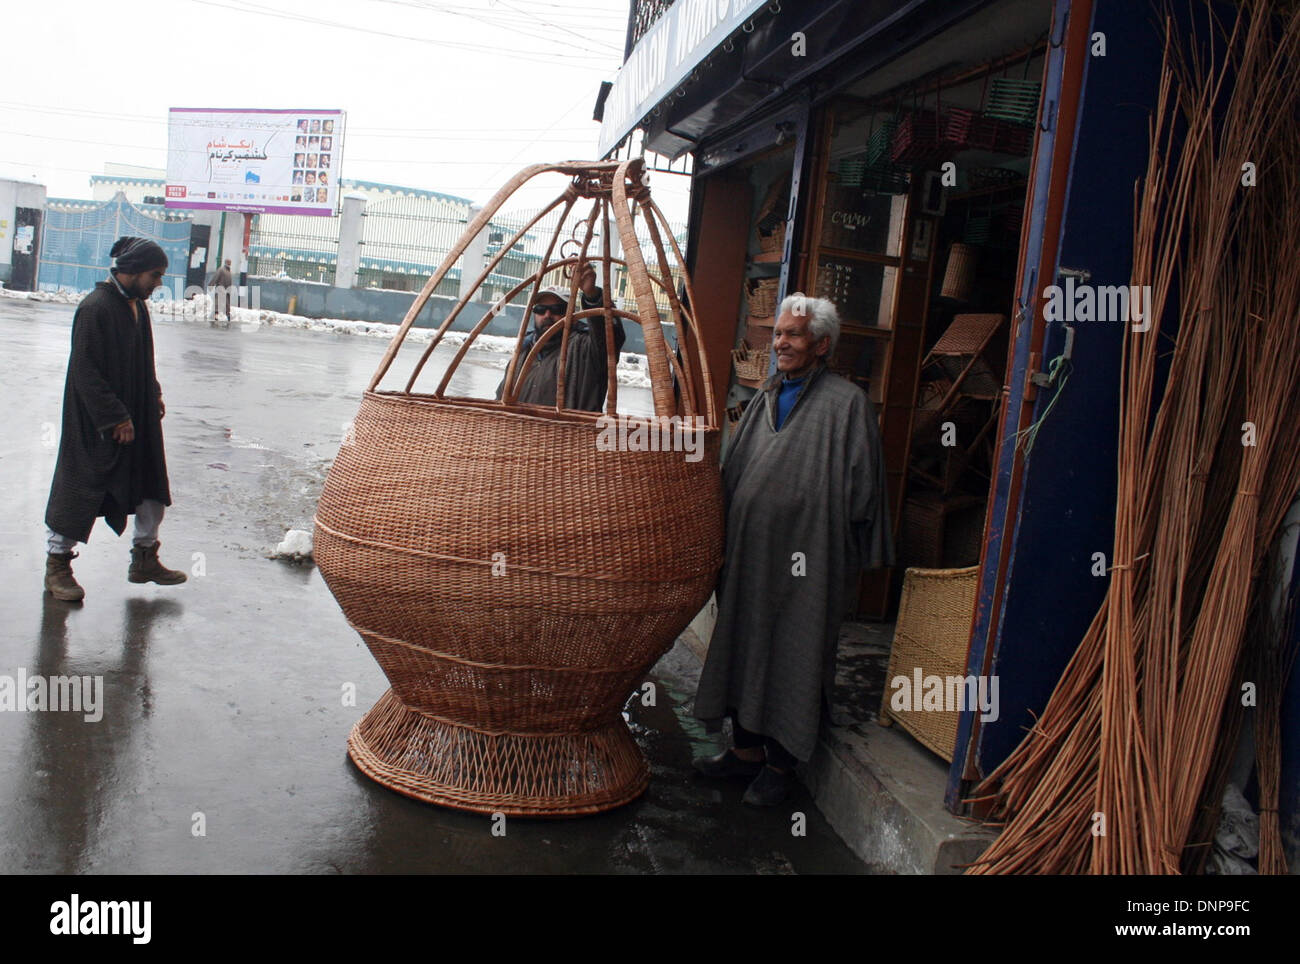 Srinagar, Indian Administered Kashmir03 January) A kashmiri 65 old man Ghulam nabi shaksaaz next right side  his shop Display A  hand made traditional 7 feet  fire pot as kashmir knowns (kangri) of worth rupees indian 25000 shahksaaz says fire pot complete 17 days   The Kangri is an earthenware container with an outer encasement of wickerwork, filled with burning coal and carried under the clothing for heat in winter months in srinagar (Sofi Suhail/ Alamy Live News Stock Photo